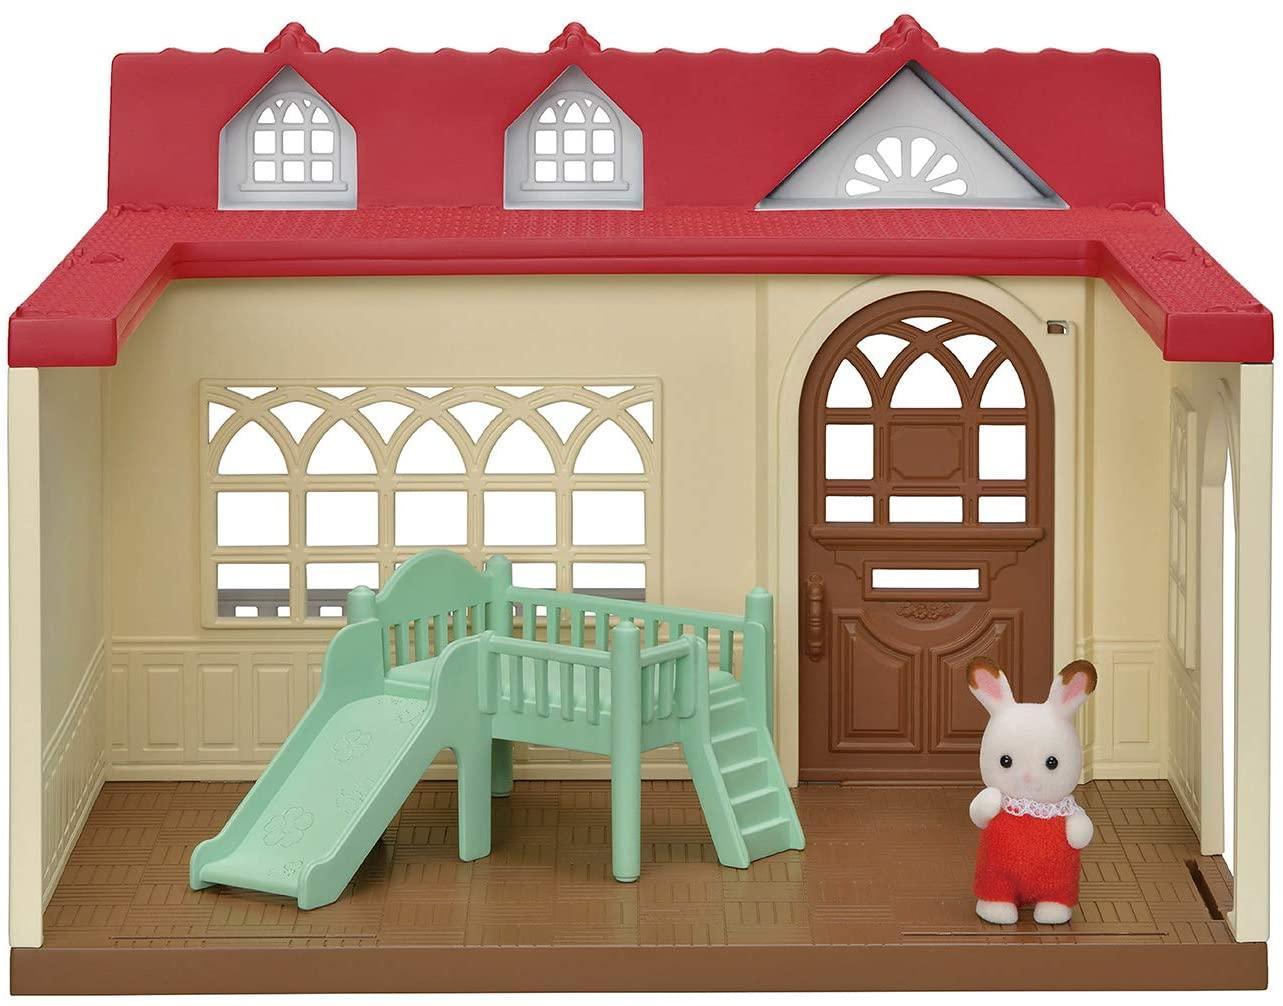 Calico Critters Sweet Raspberry Home Dollhouse Playset for $12.79